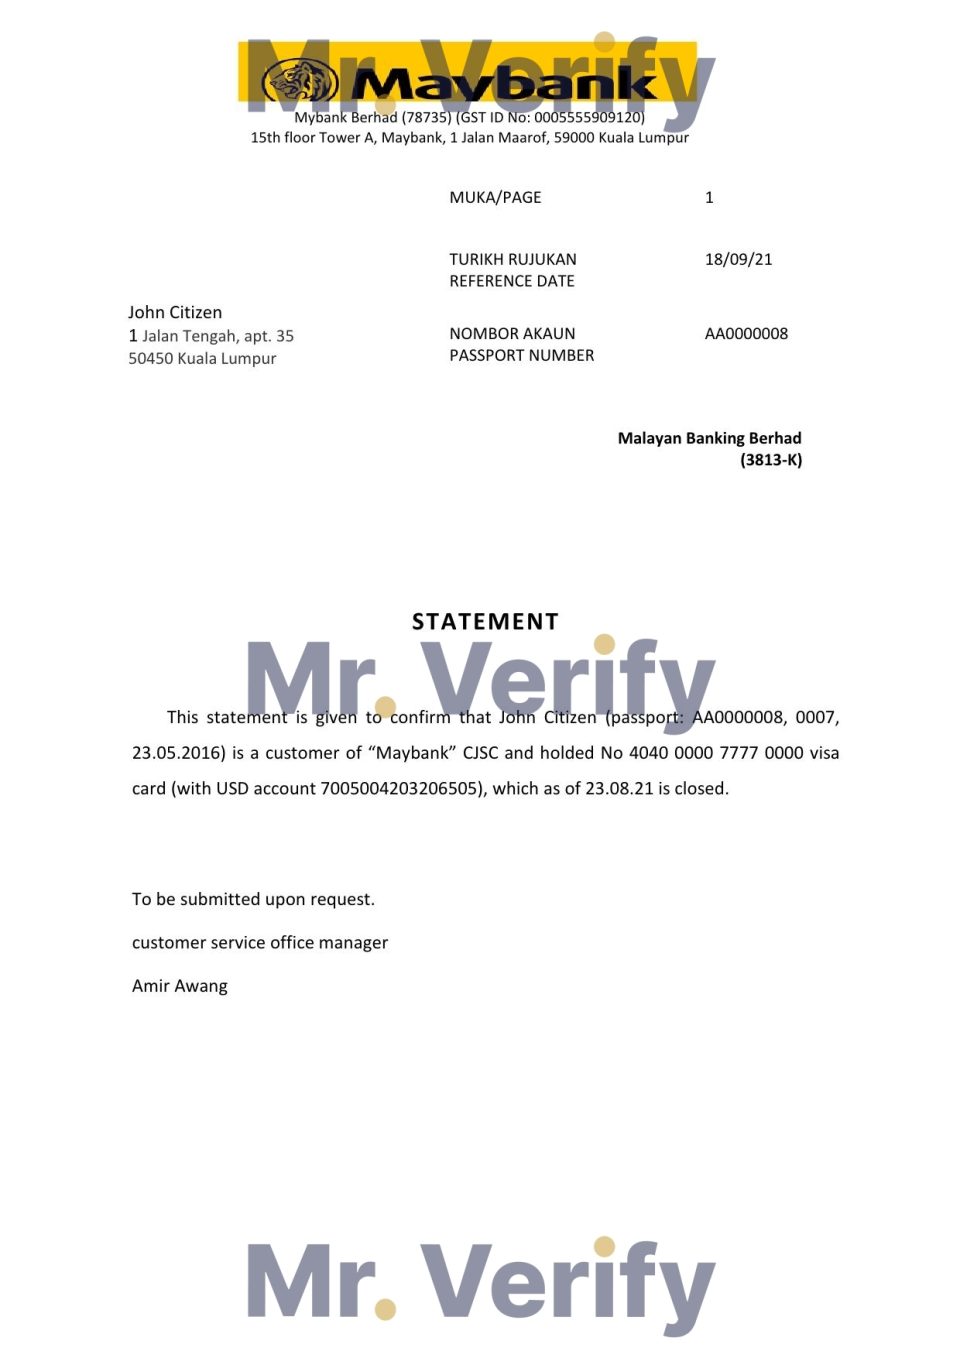 Download Malaysia Maybank Bank Reference Letter Templates | Editable Word